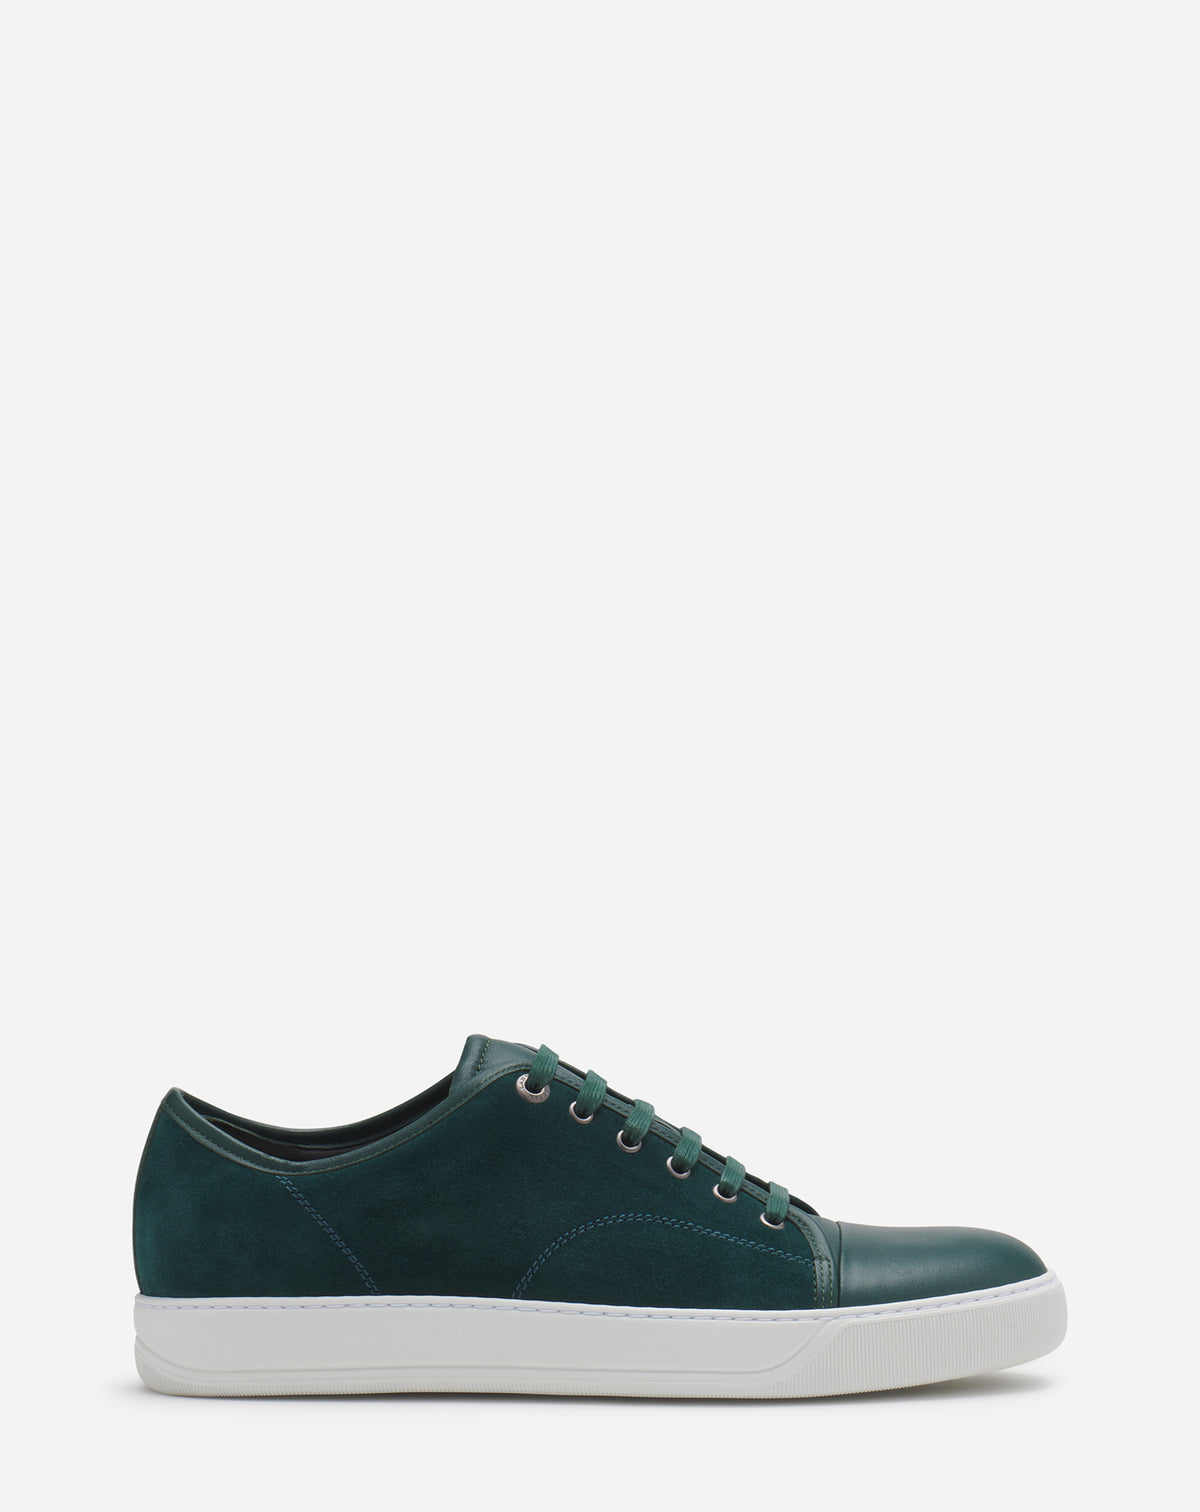 DBB1 LEATHER AND SUEDE SNEAKERS DARK GREEN | Lanvin – LANVIN